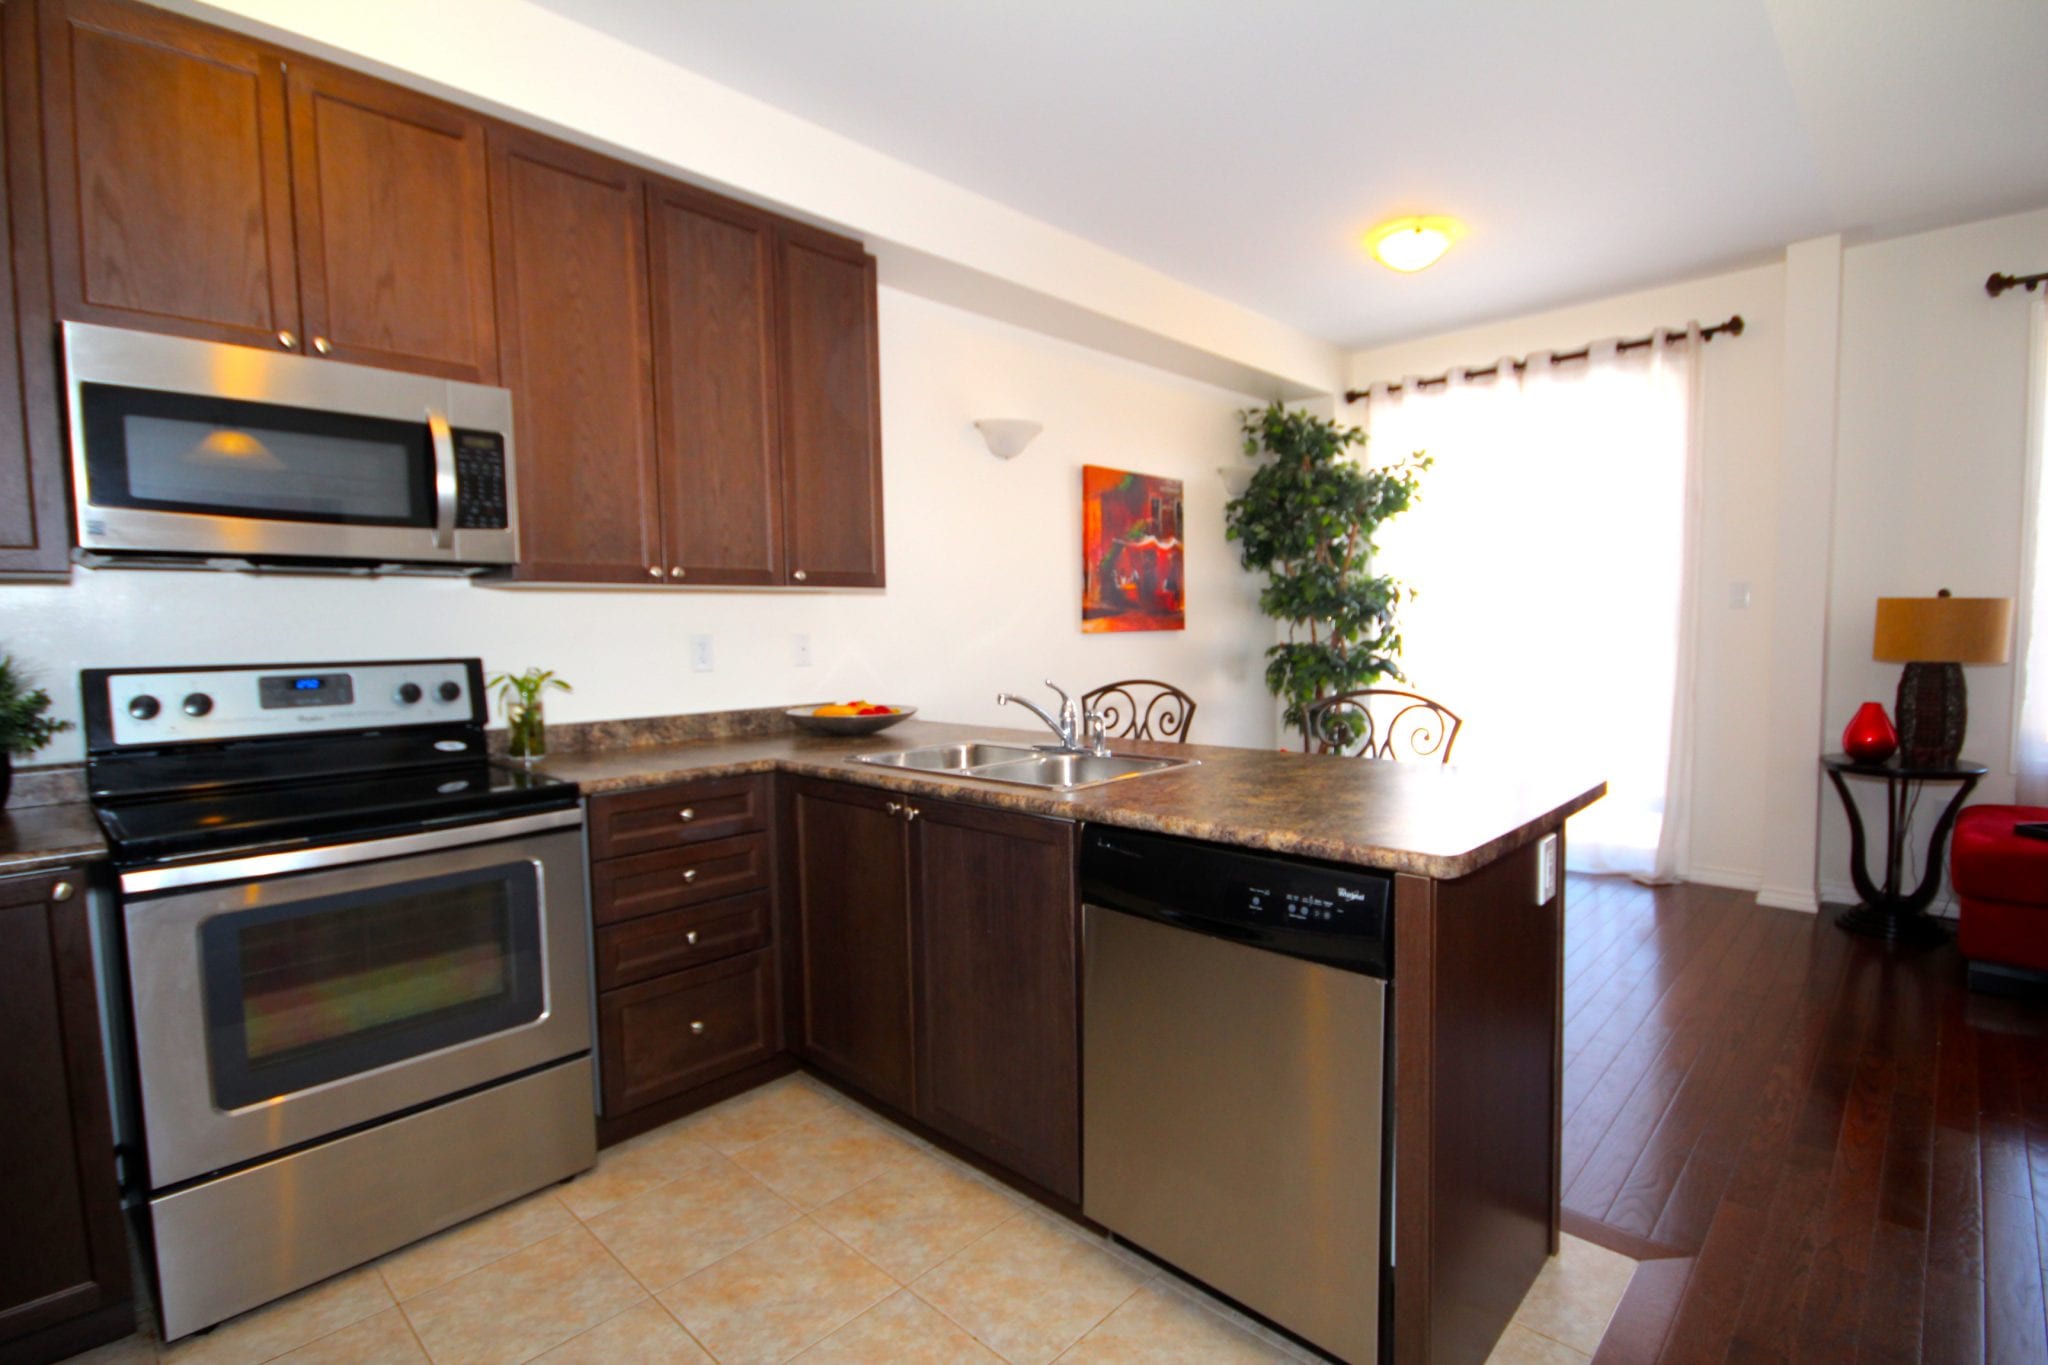 Kitchen with all amenities